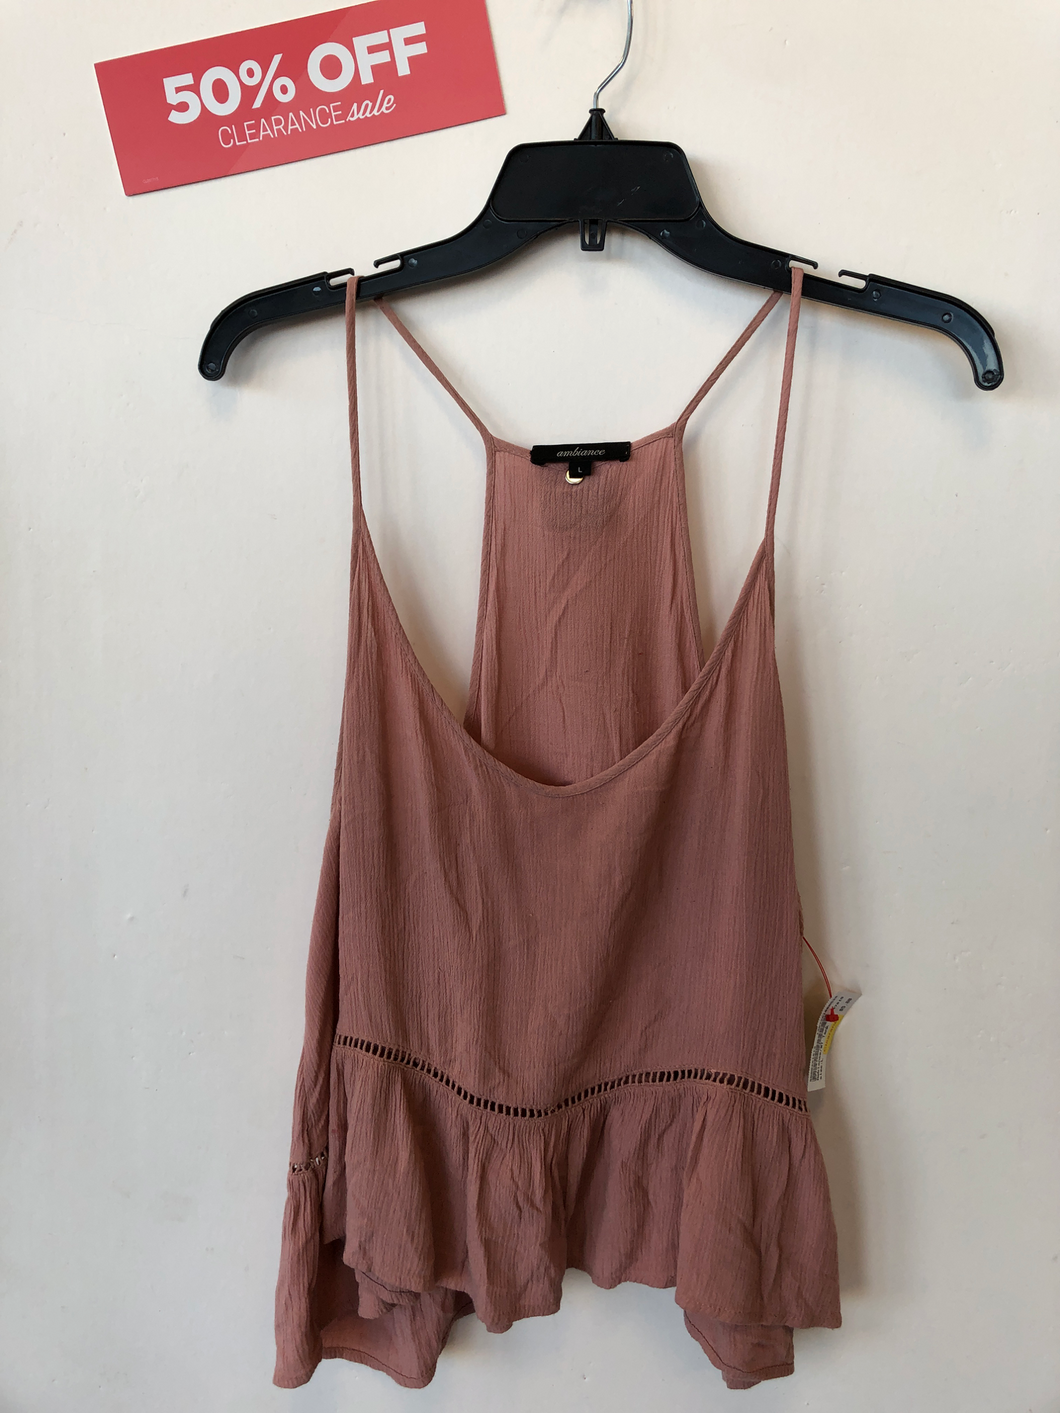 Ambiance Tank Top Size Large